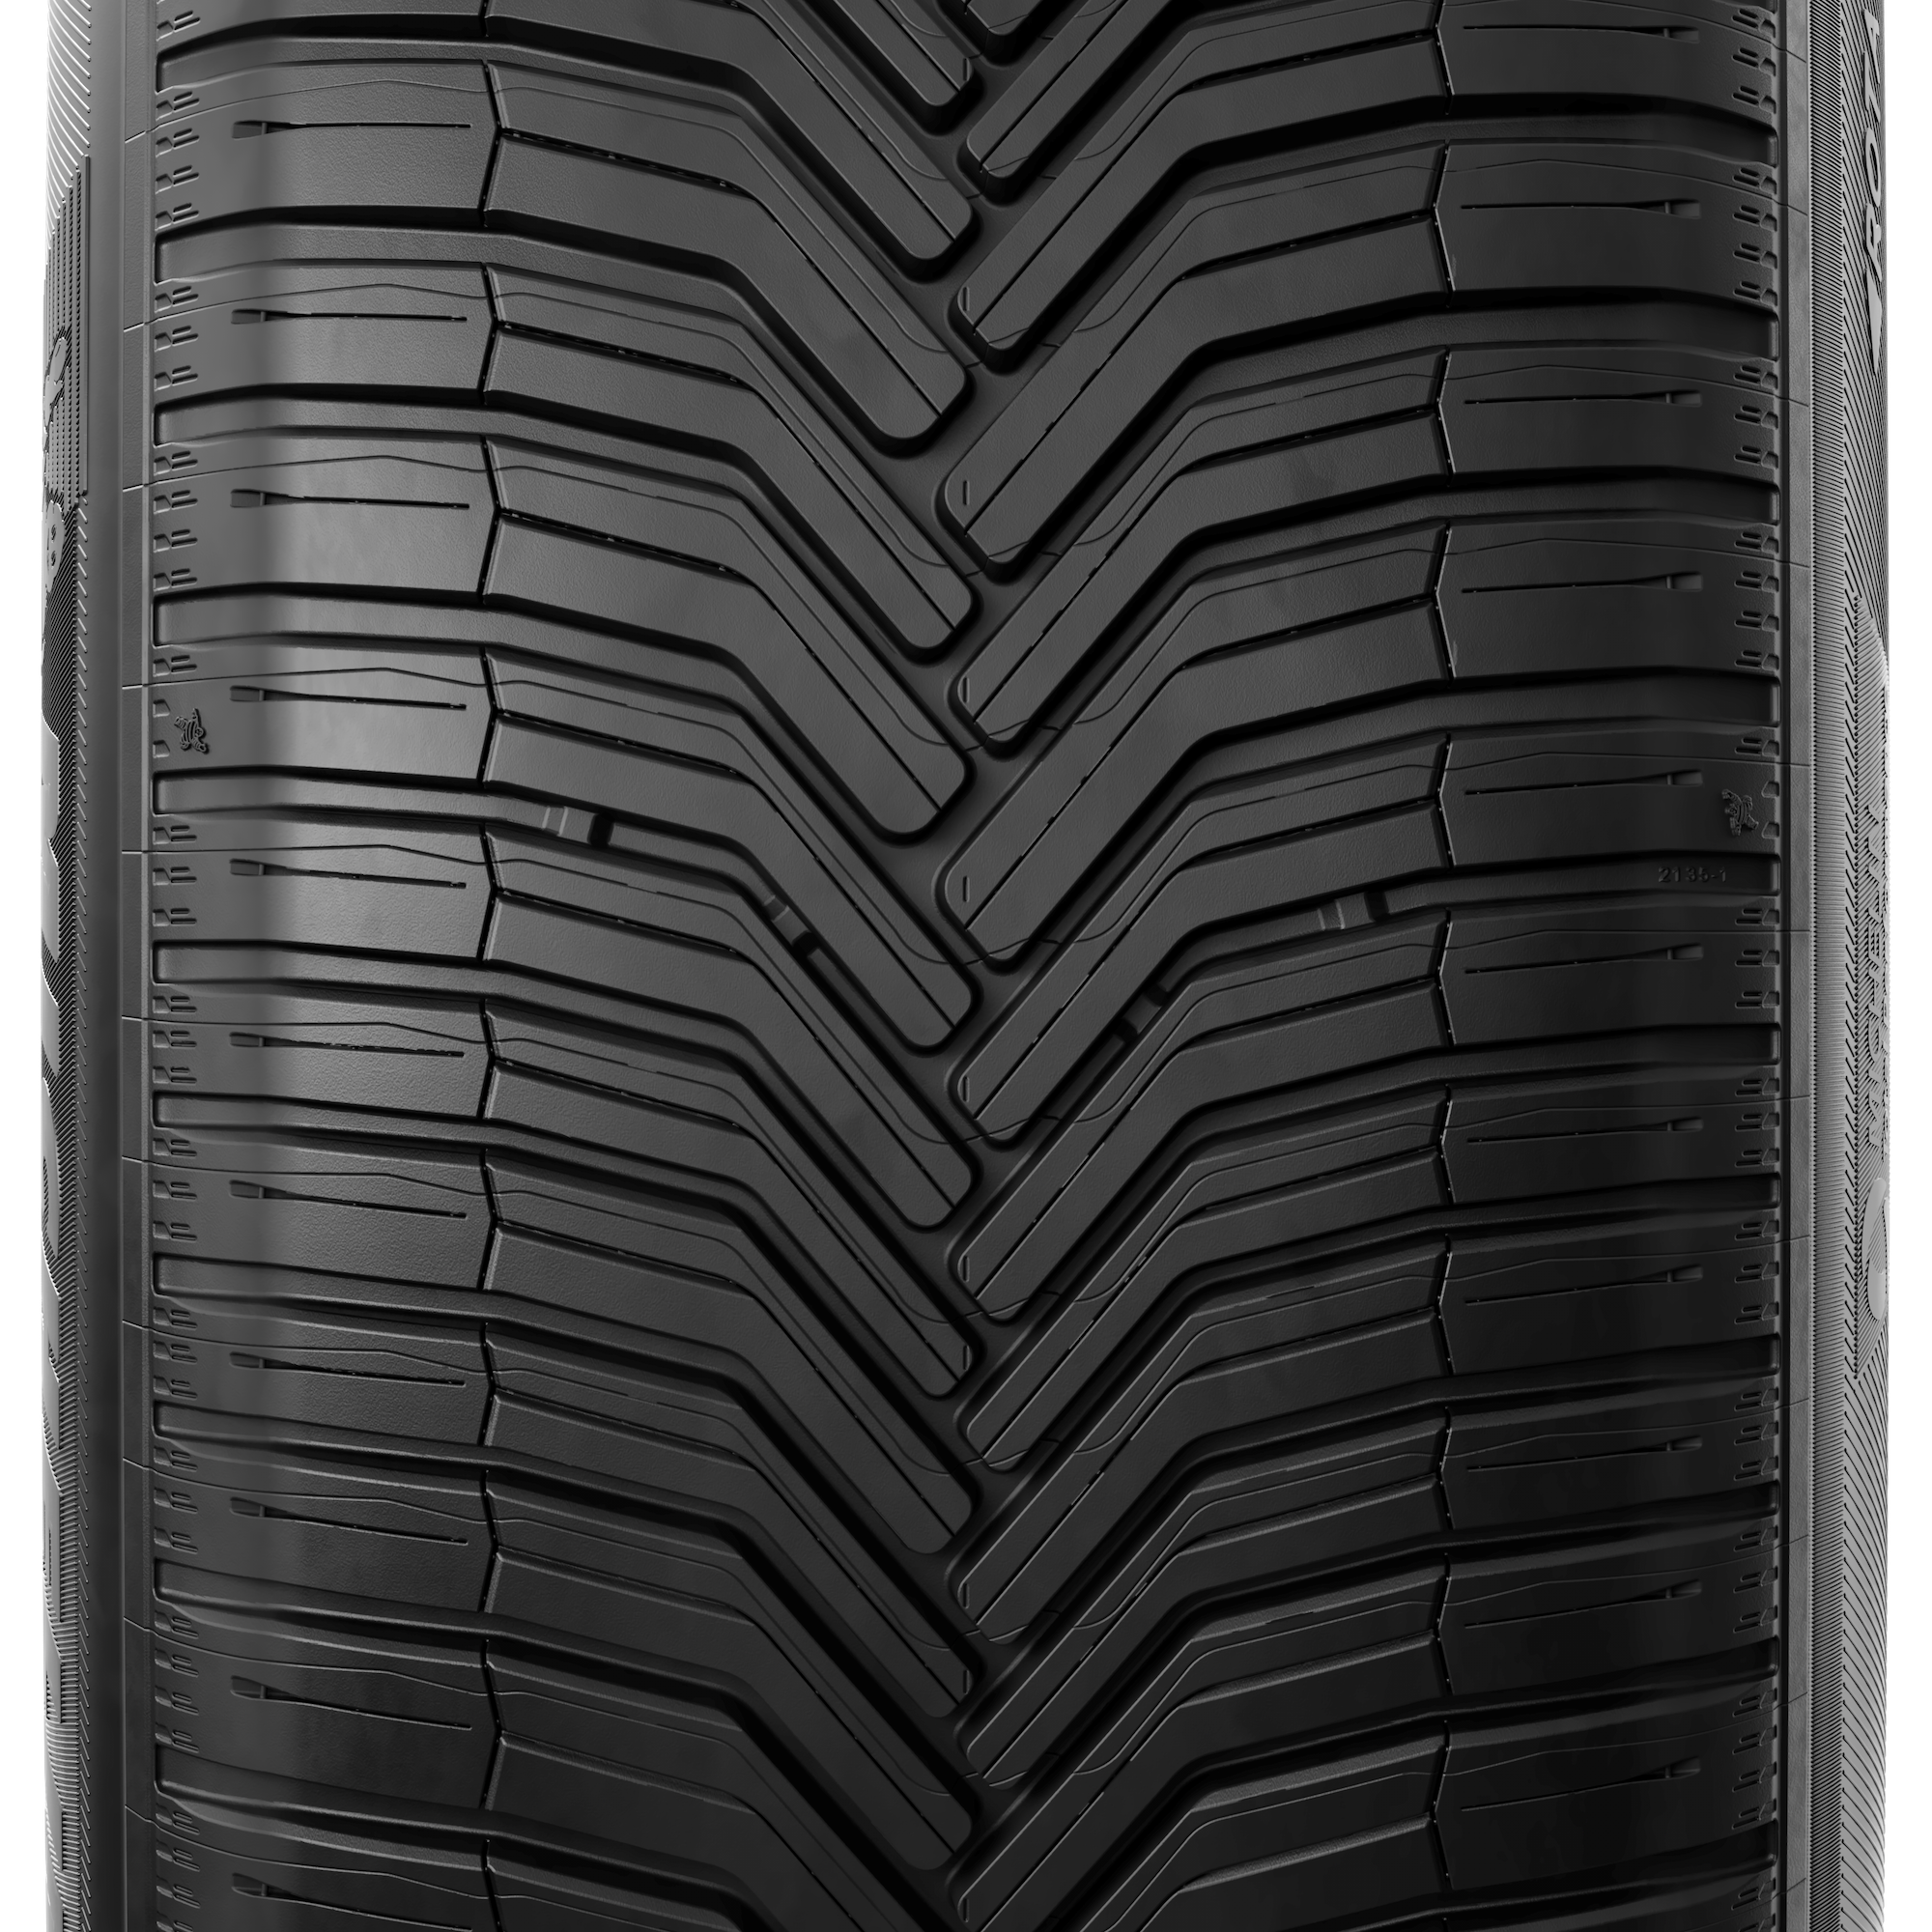  235/65 R18 110H XL CROSSCLIMATE SUV   -